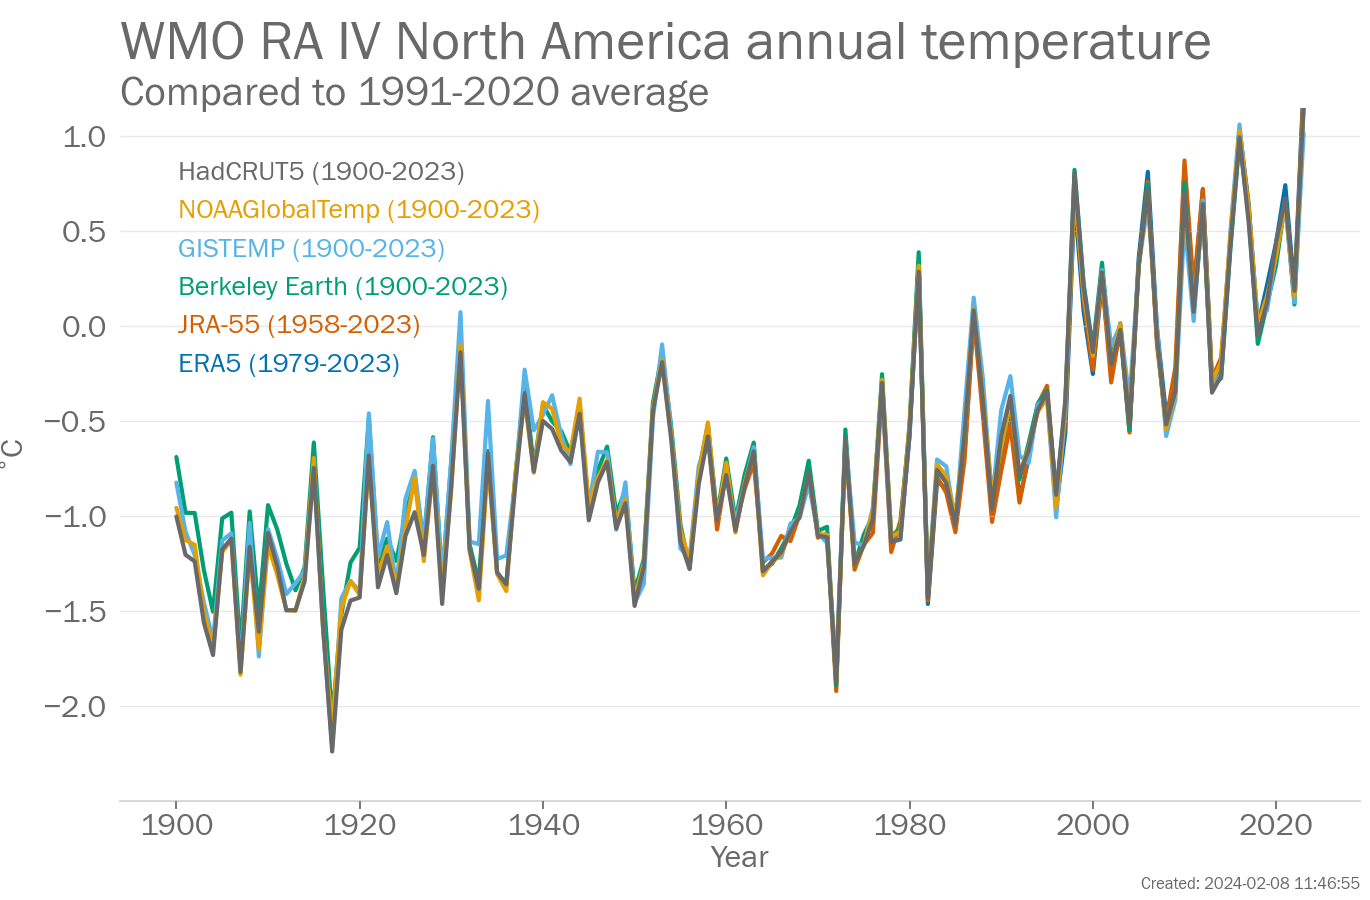 Annual Regional mean temperature for WMO RA 4 North America (°C, difference from the 1991-2020 average)  from 1900-2023. Data are from the following six data sets: Berkeley Earth, ERA5, GISTEMP, HadCRUT5, JRA-55, NOAAGlobalTemp.